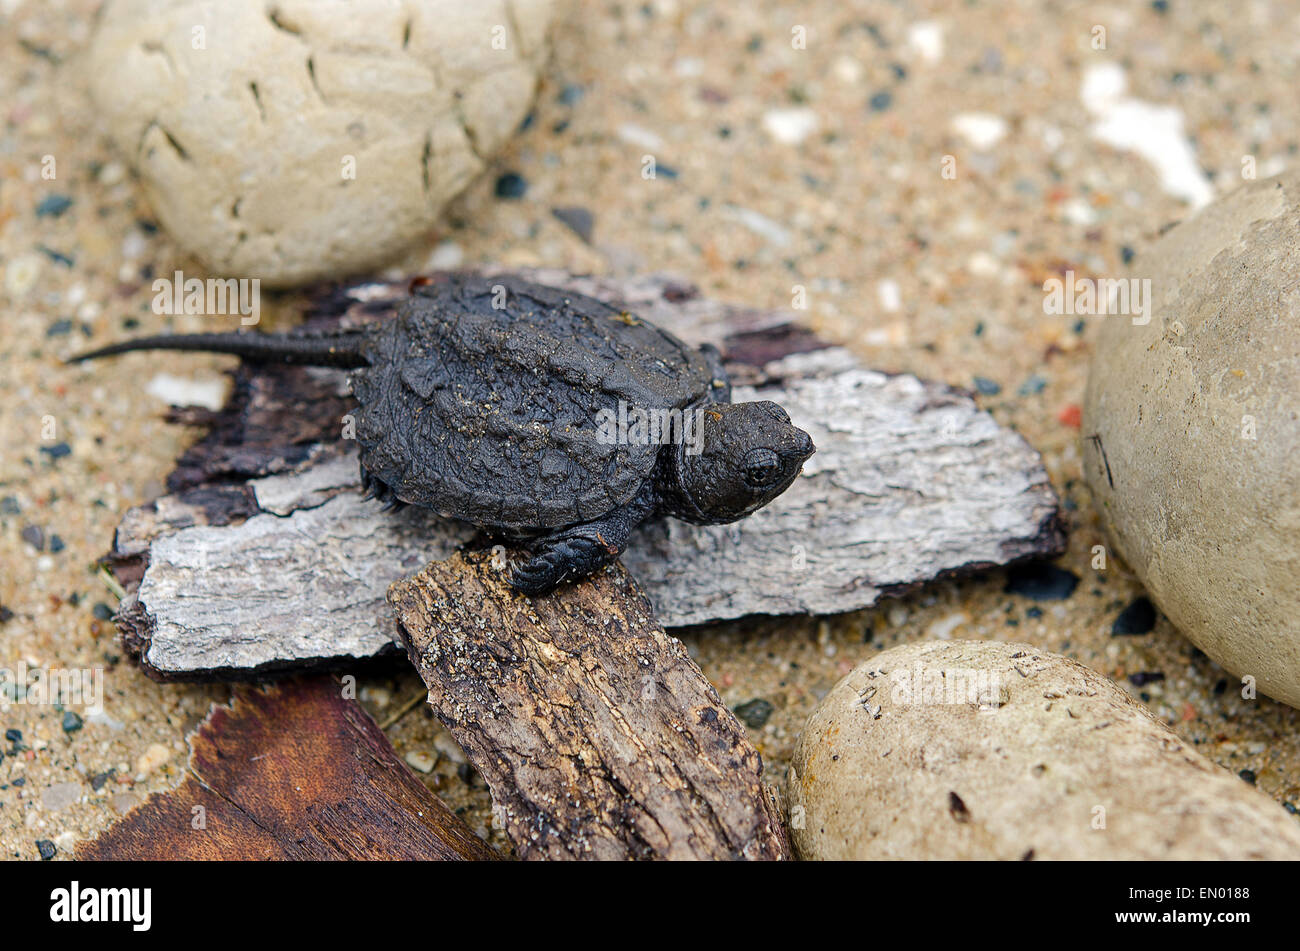 Baby snapping turtle on a pieces of old wood and rocks. Stock Photo